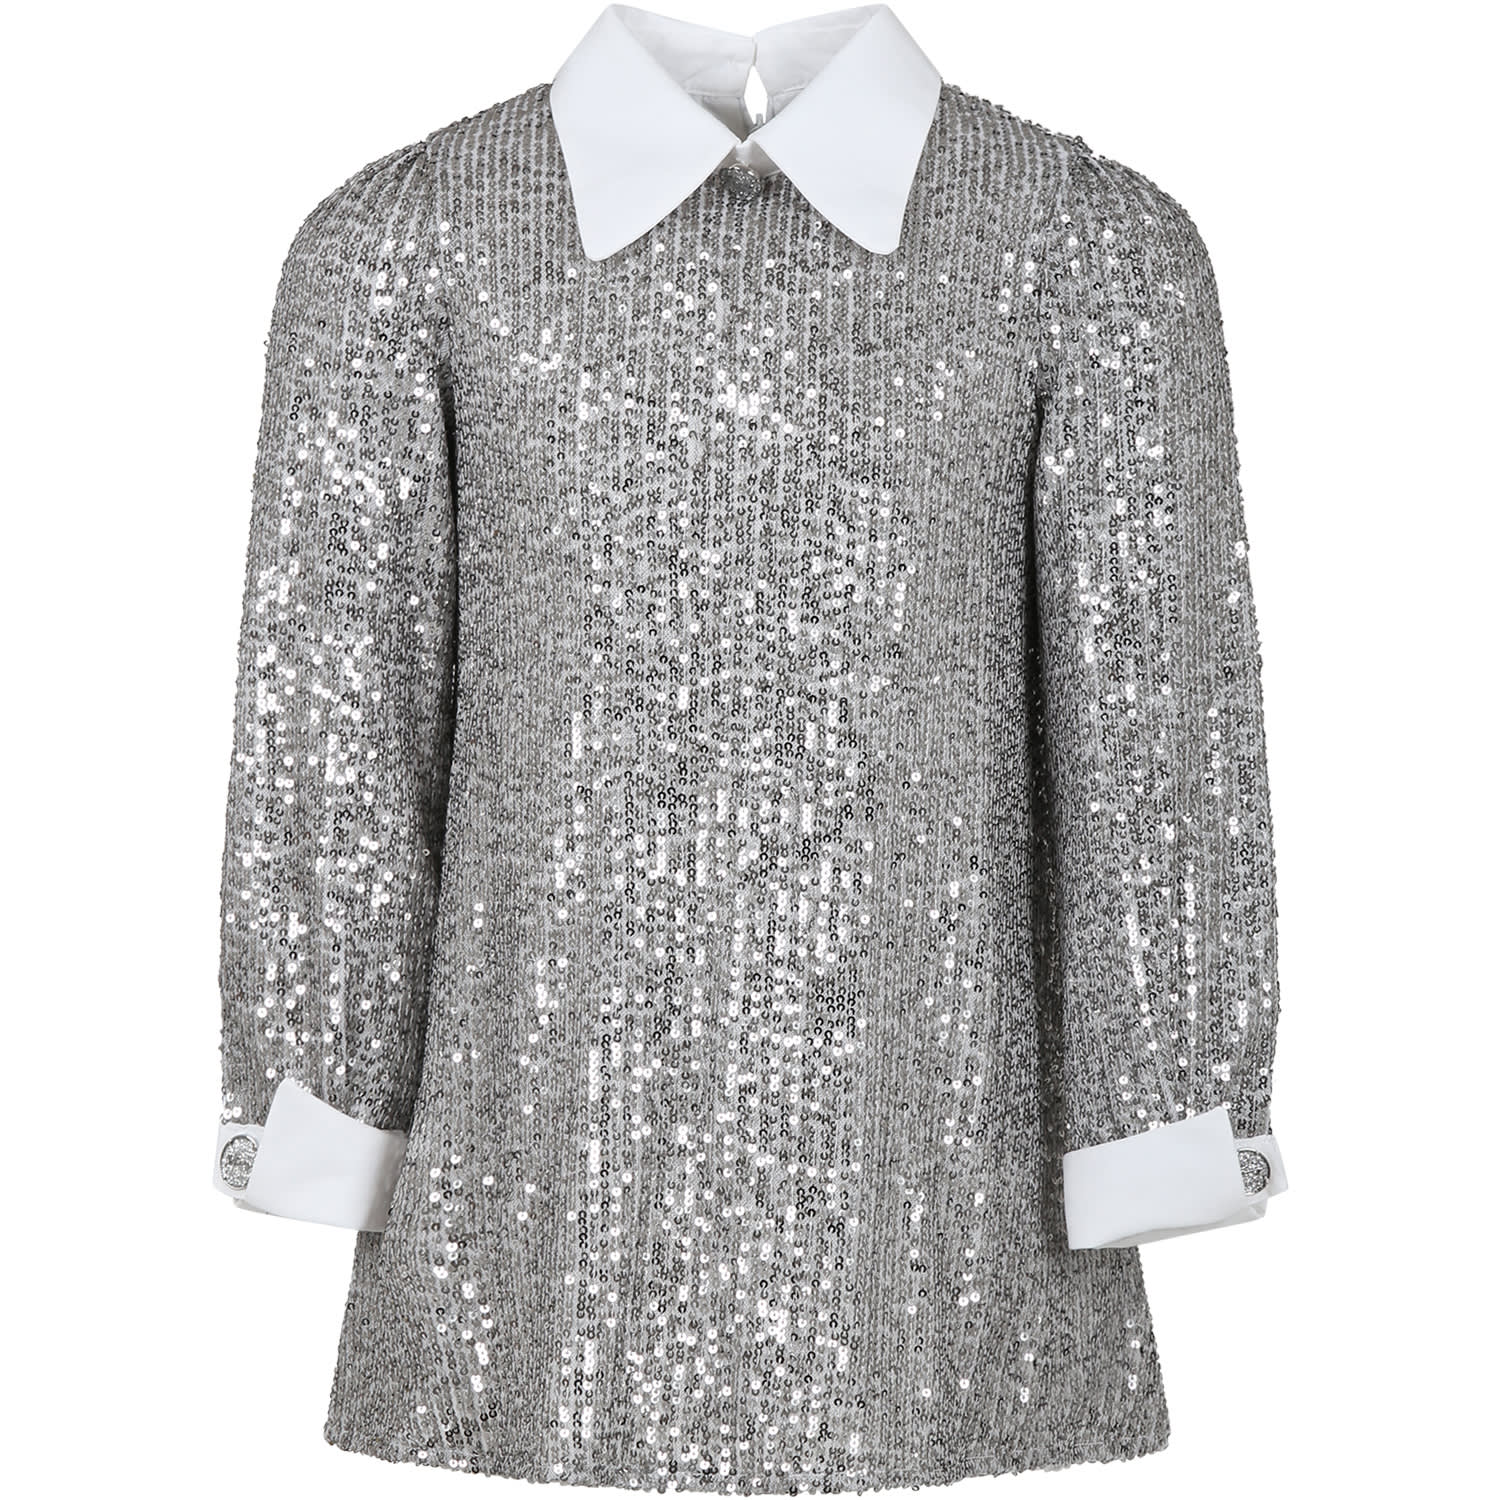 Genny Kids' Silver Dress For Girl With Sequins